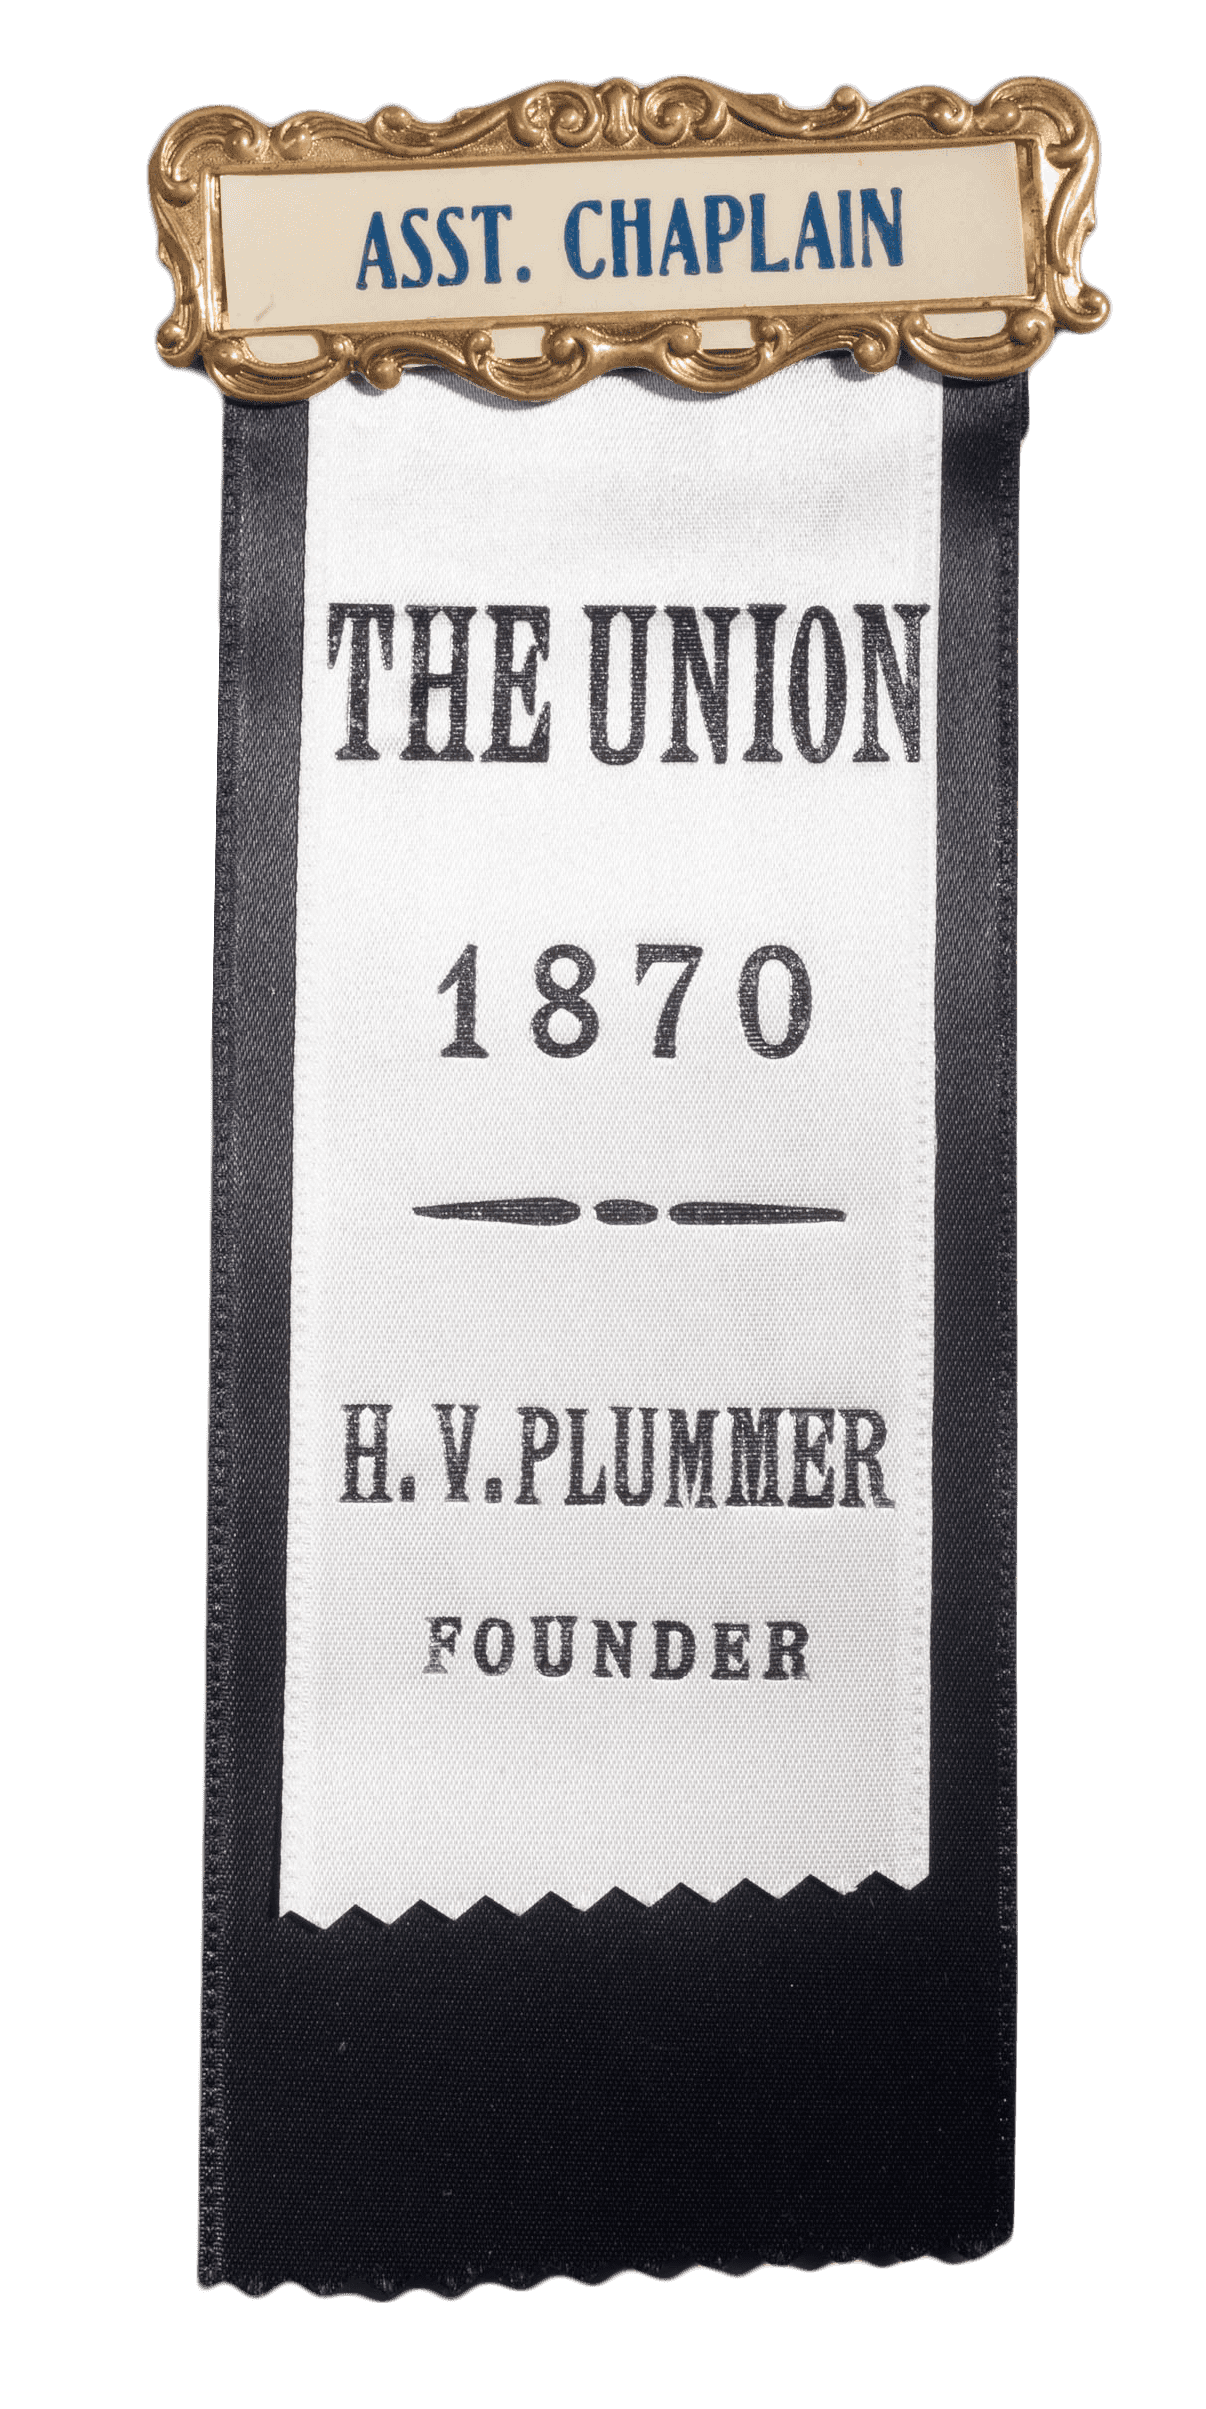 Black and white ribbon badge with gold decorative name tag for "Asst. Chaplain "  The white ribbon is imprinted with "The Union   1870   H.V. Plummer Founder"